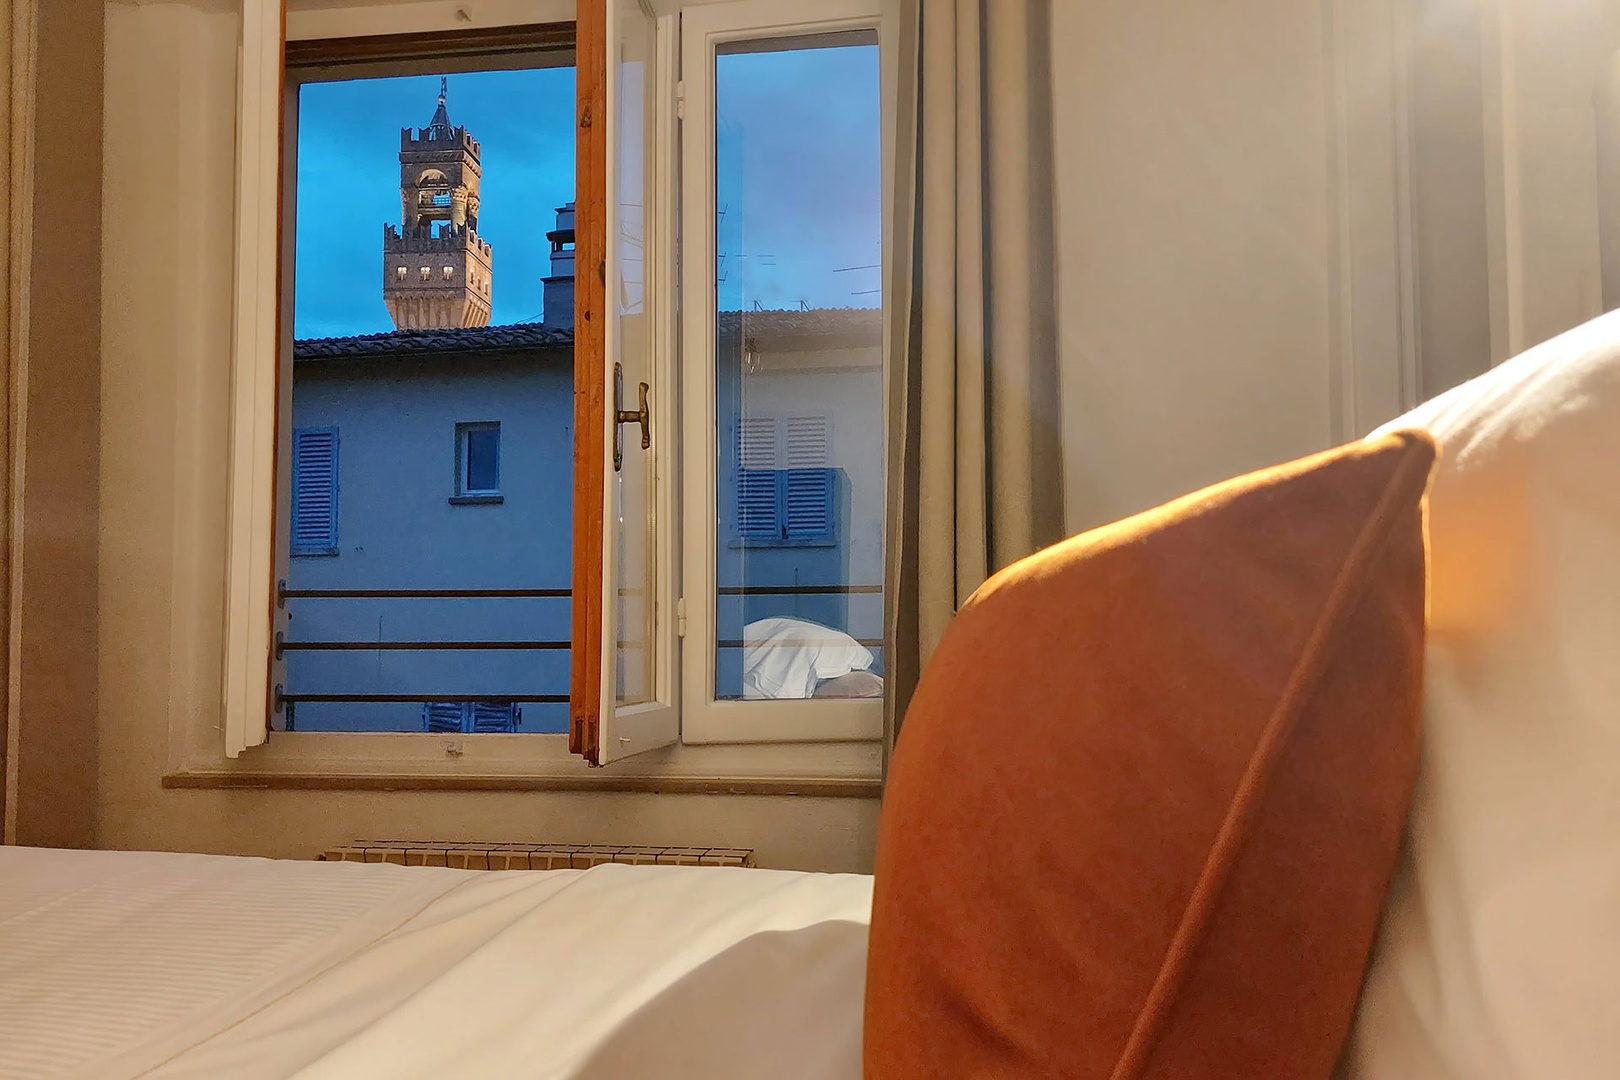 Enjoy views of the bell tower while lying in bed.